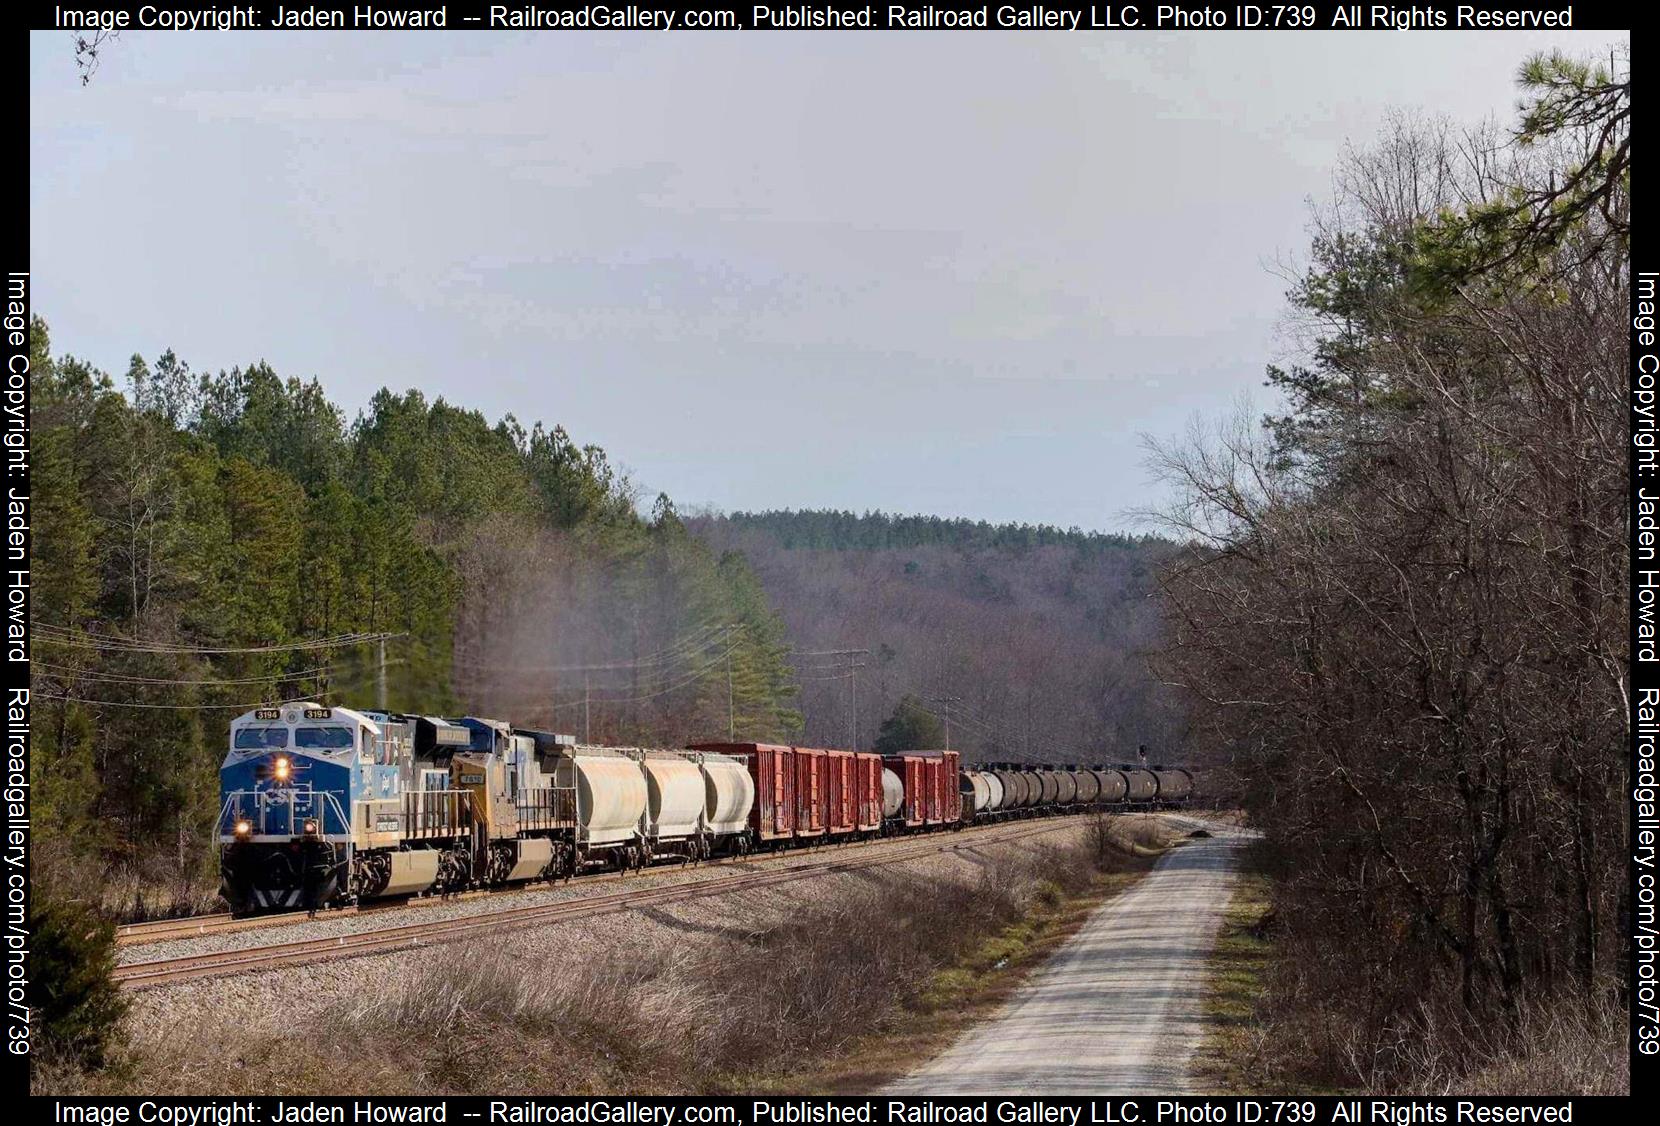 CSX 3194 is a class GE ES44AC and  is pictured in Thermal City , North Carolina, USA.  This was taken along the Blue Ridge Subdivision/Z Line on the CSX Transportation. Photo Copyright: Jaden Howard  uploaded to Railroad Gallery on 02/23/2023. This photograph of CSX 3194 was taken on Thursday, February 23, 2023. All Rights Reserved. 